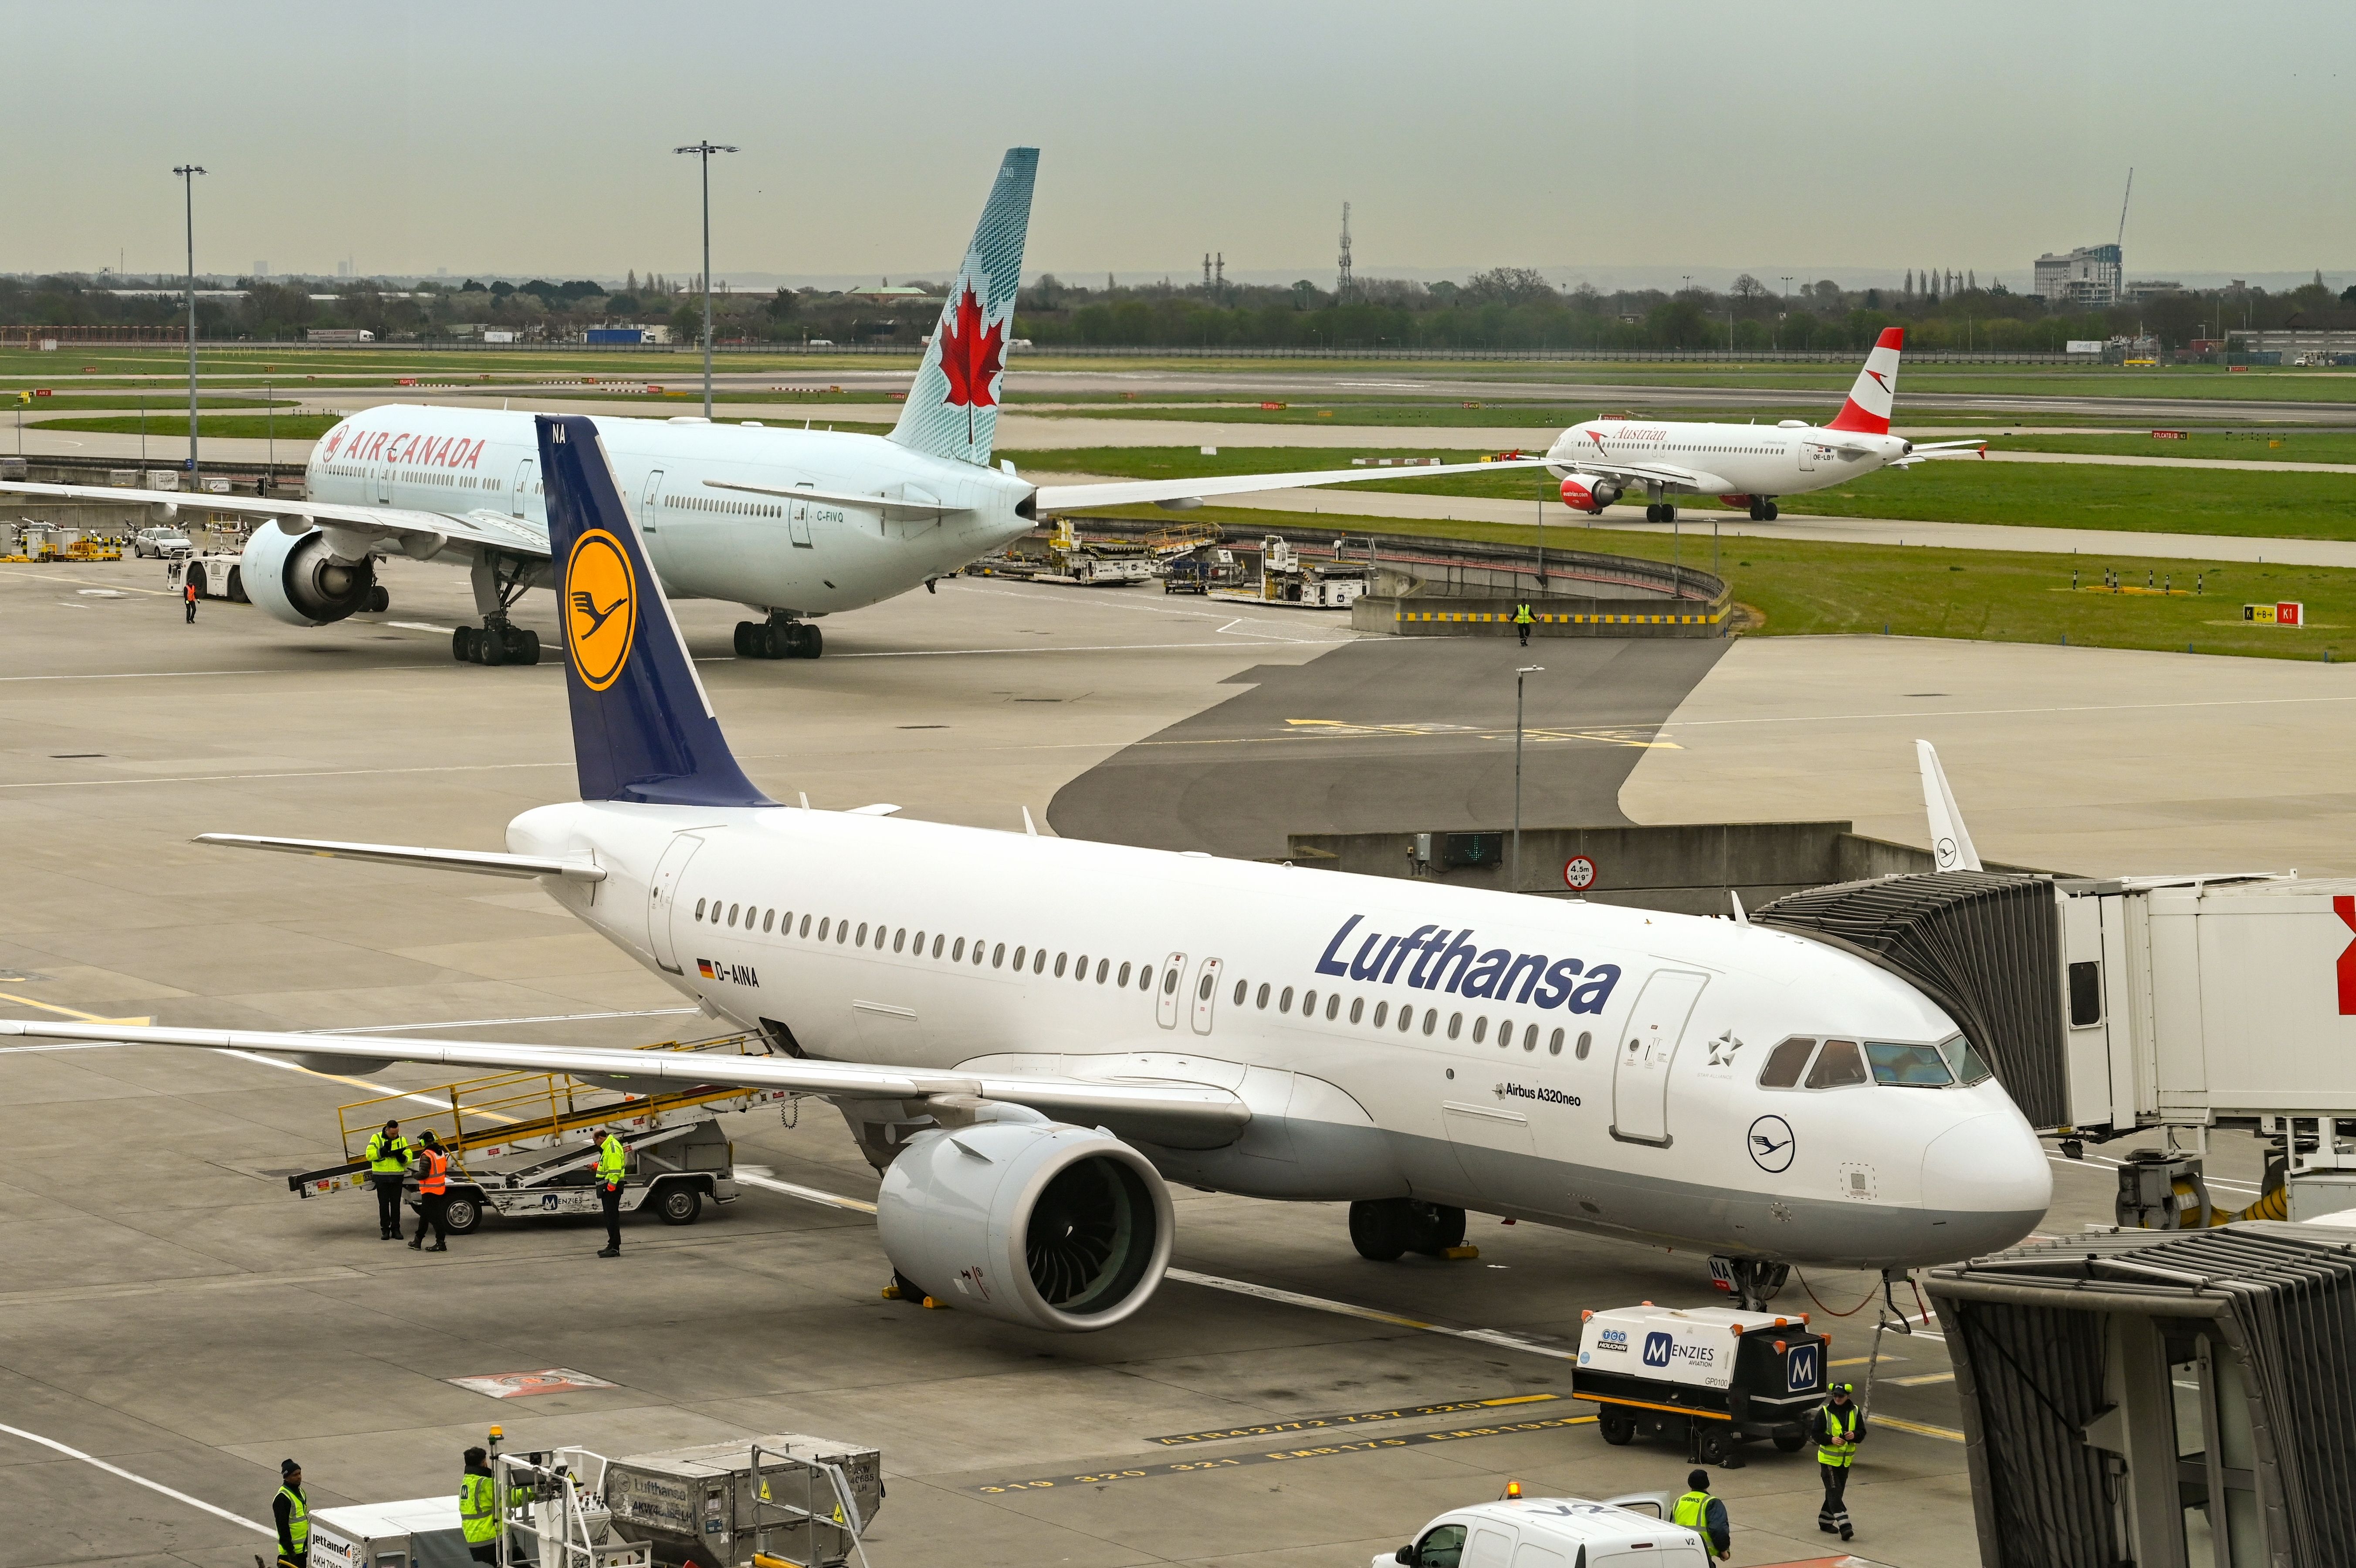 Lufthansa Airbus A320neo Parked At London Heathrow Airport With Air Canada & Austrian Airlines Planes In The Background